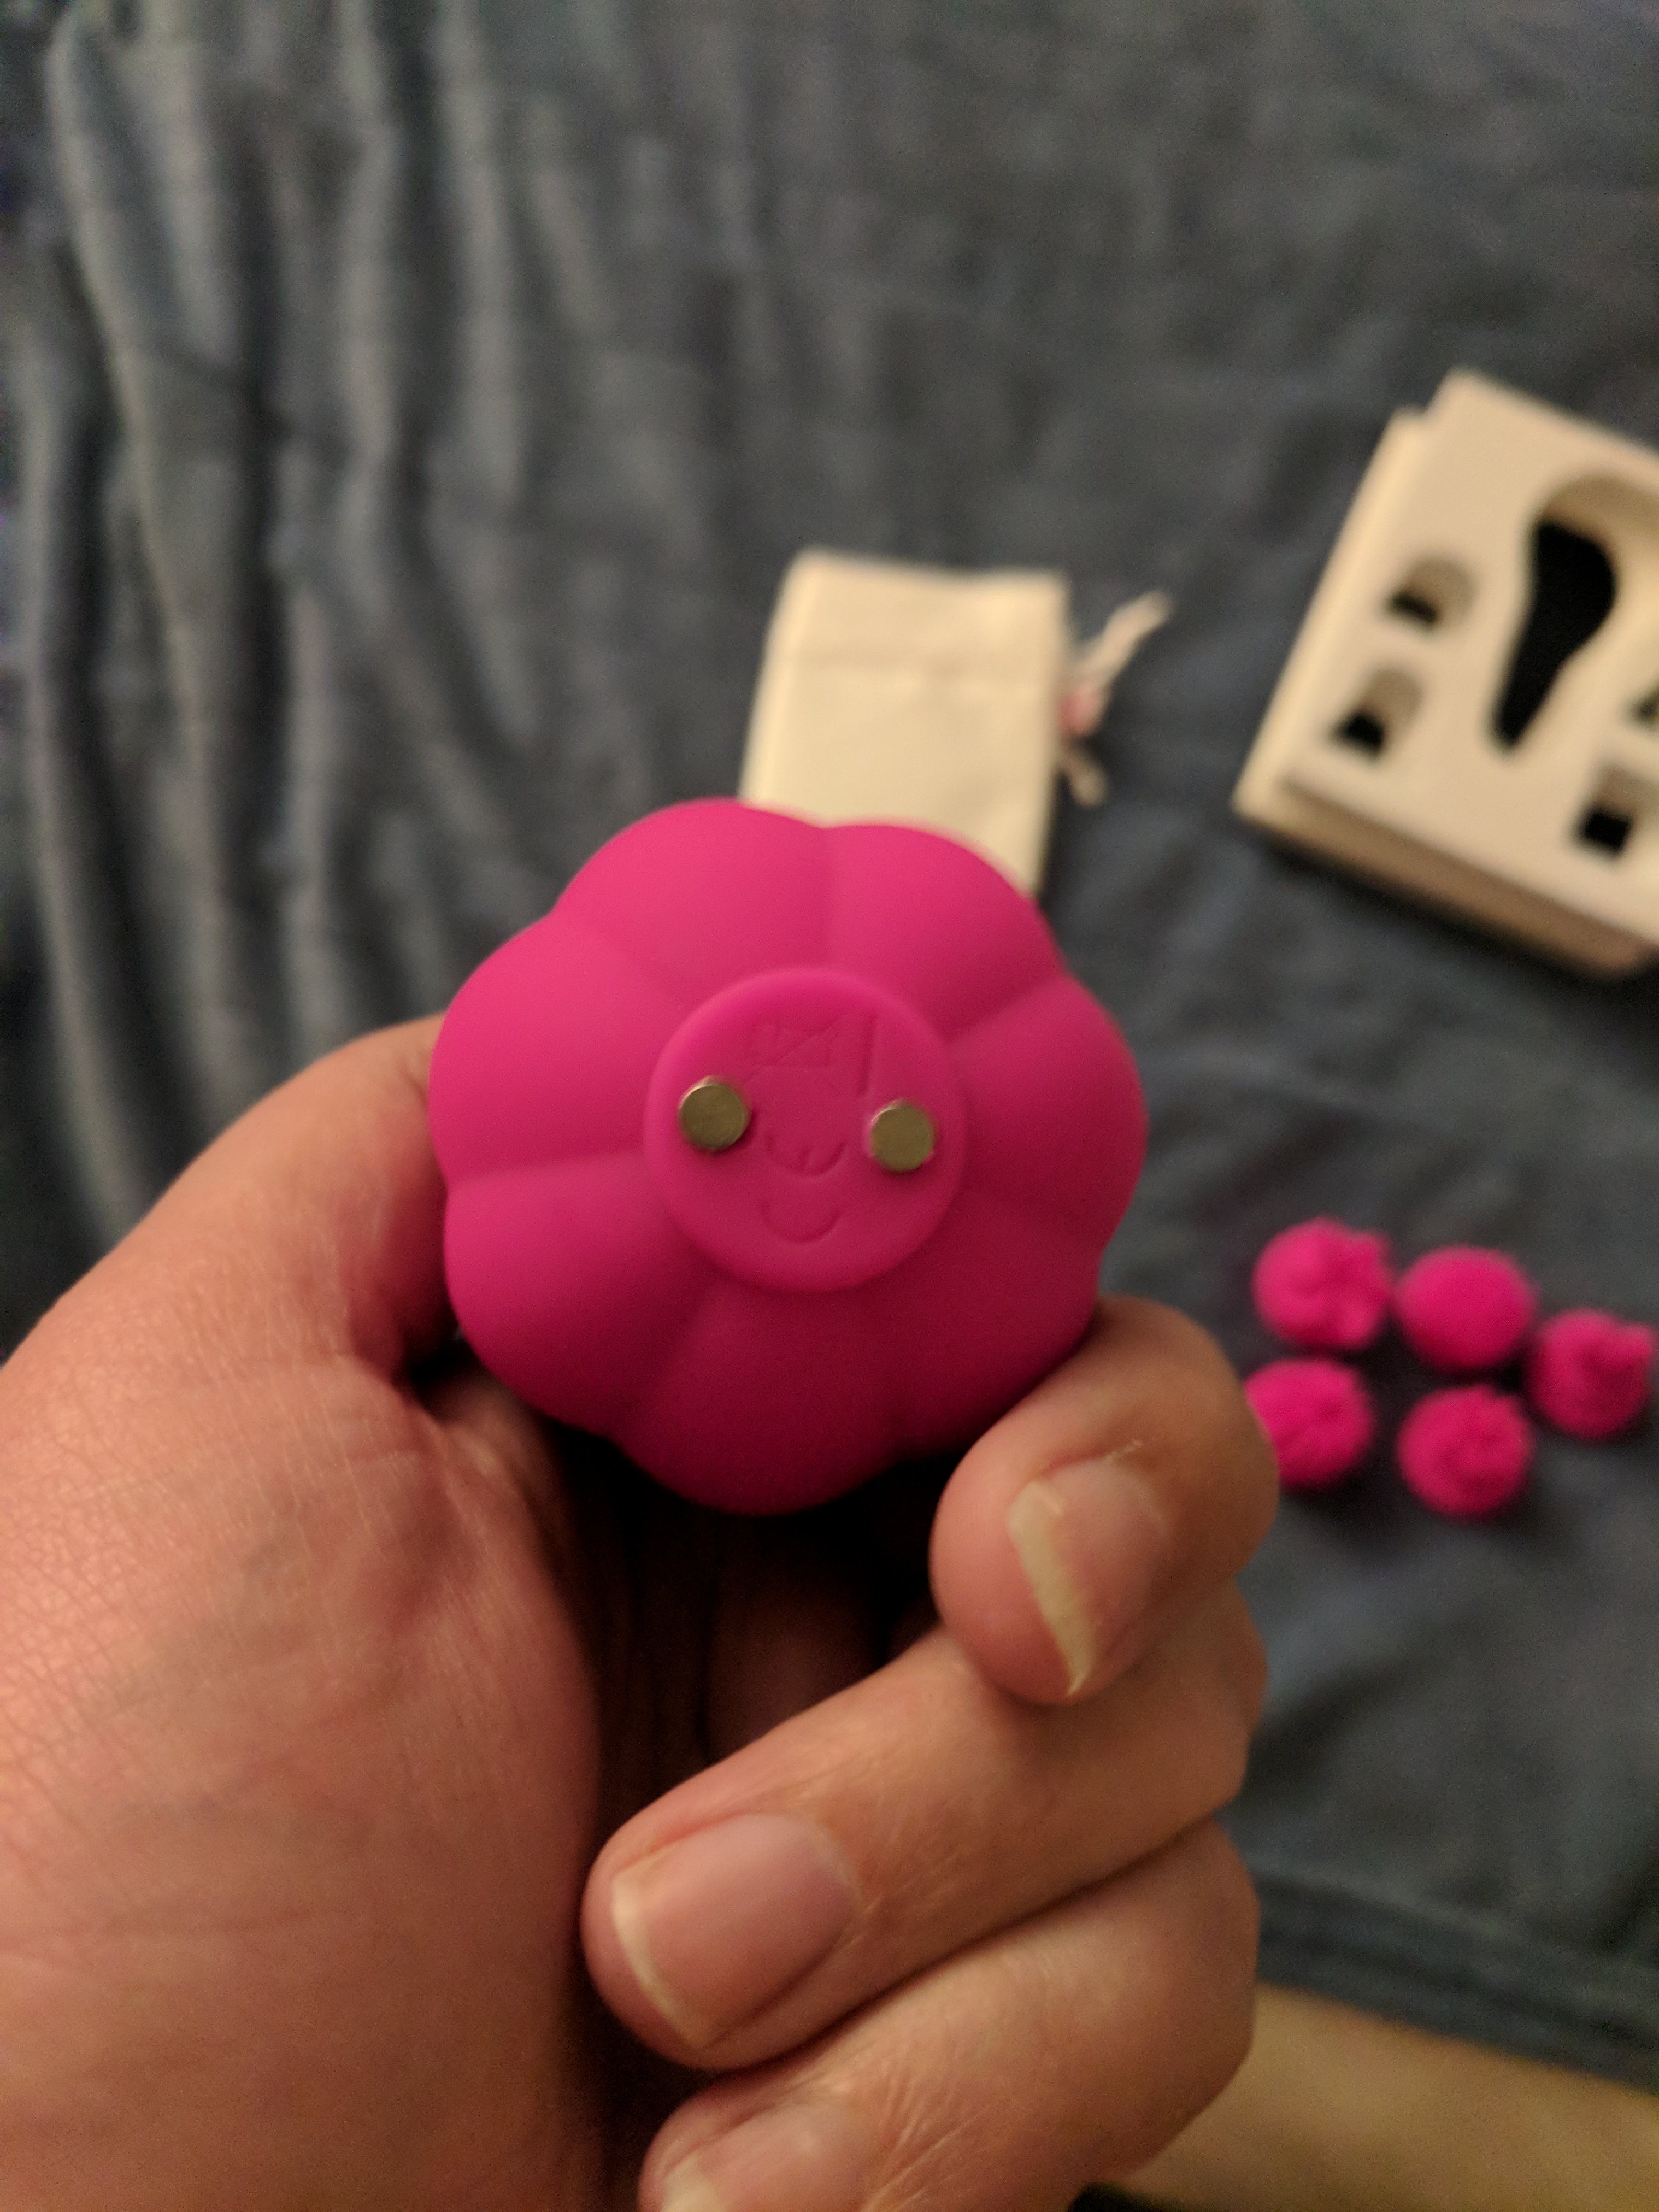 Caress magnetic charger attachment, two dots on the top of the bulb